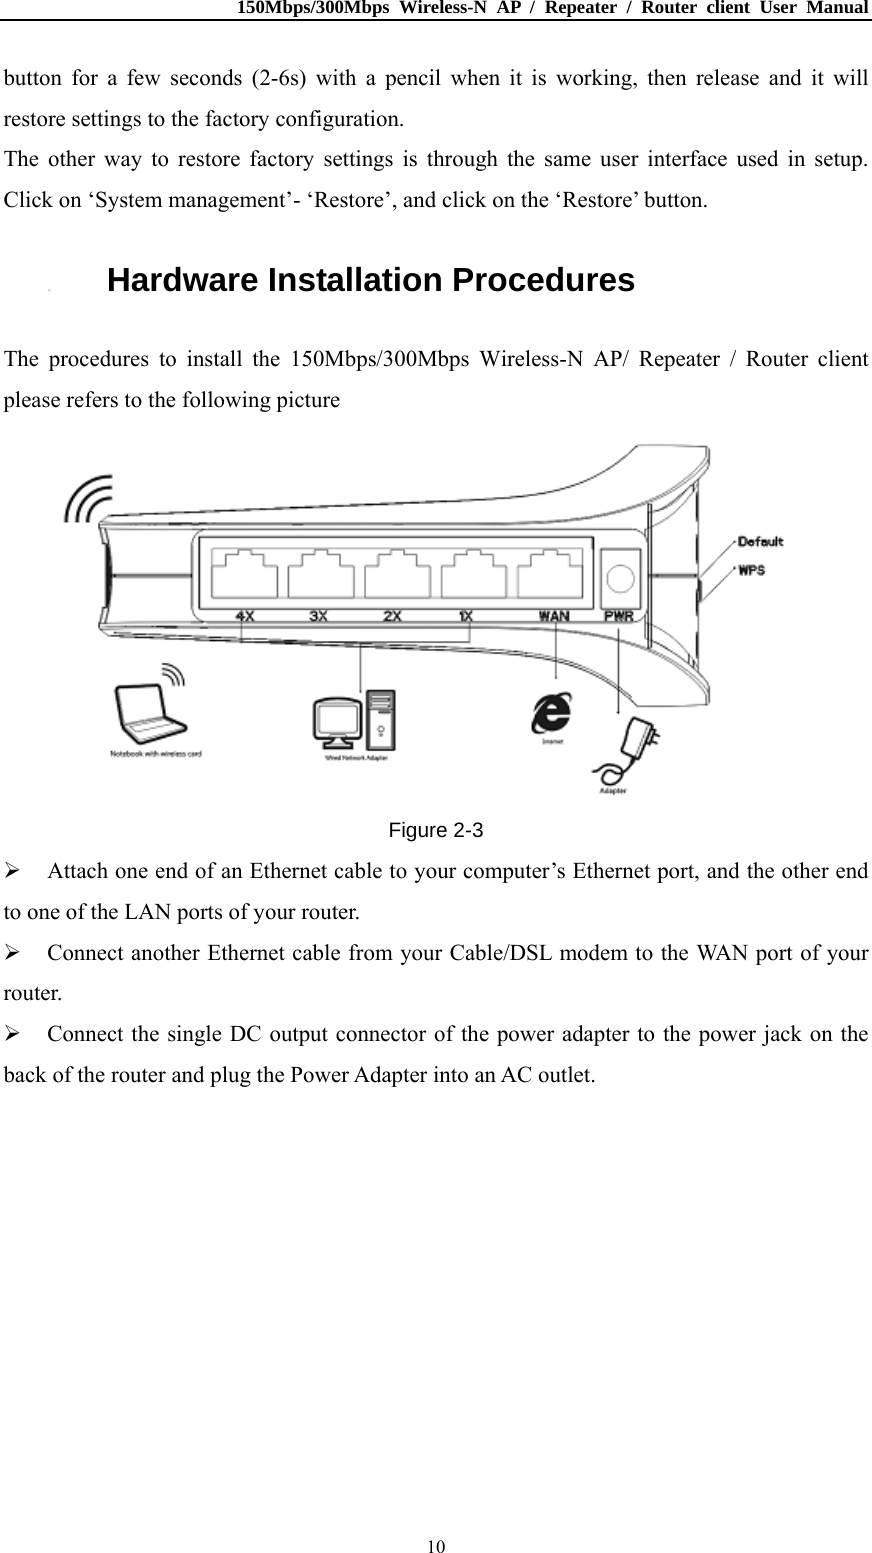 150Mbps/300Mbps Wireless-N AP / Repeater / Router client User Manual  10button for a few seconds (2-6s) with a pencil when it is working, then release and it will restore settings to the factory configuration. The other way to restore factory settings is through the same user interface used in setup. Click on ‘System management’- ‘Restore’, and click on the ‘Restore’ button. 2.4. Hardware Installation Procedures The procedures to install the 150Mbps/300Mbps Wireless-N AP/ Repeater / Router client  please refers to the following picture  Figure 2-3  Attach one end of an Ethernet cable to your computer’s Ethernet port, and the other end to one of the LAN ports of your router.  Connect another Ethernet cable from your Cable/DSL modem to the WAN port of your router.  Connect the single DC output connector of the power adapter to the power jack on the back of the router and plug the Power Adapter into an AC outlet. 